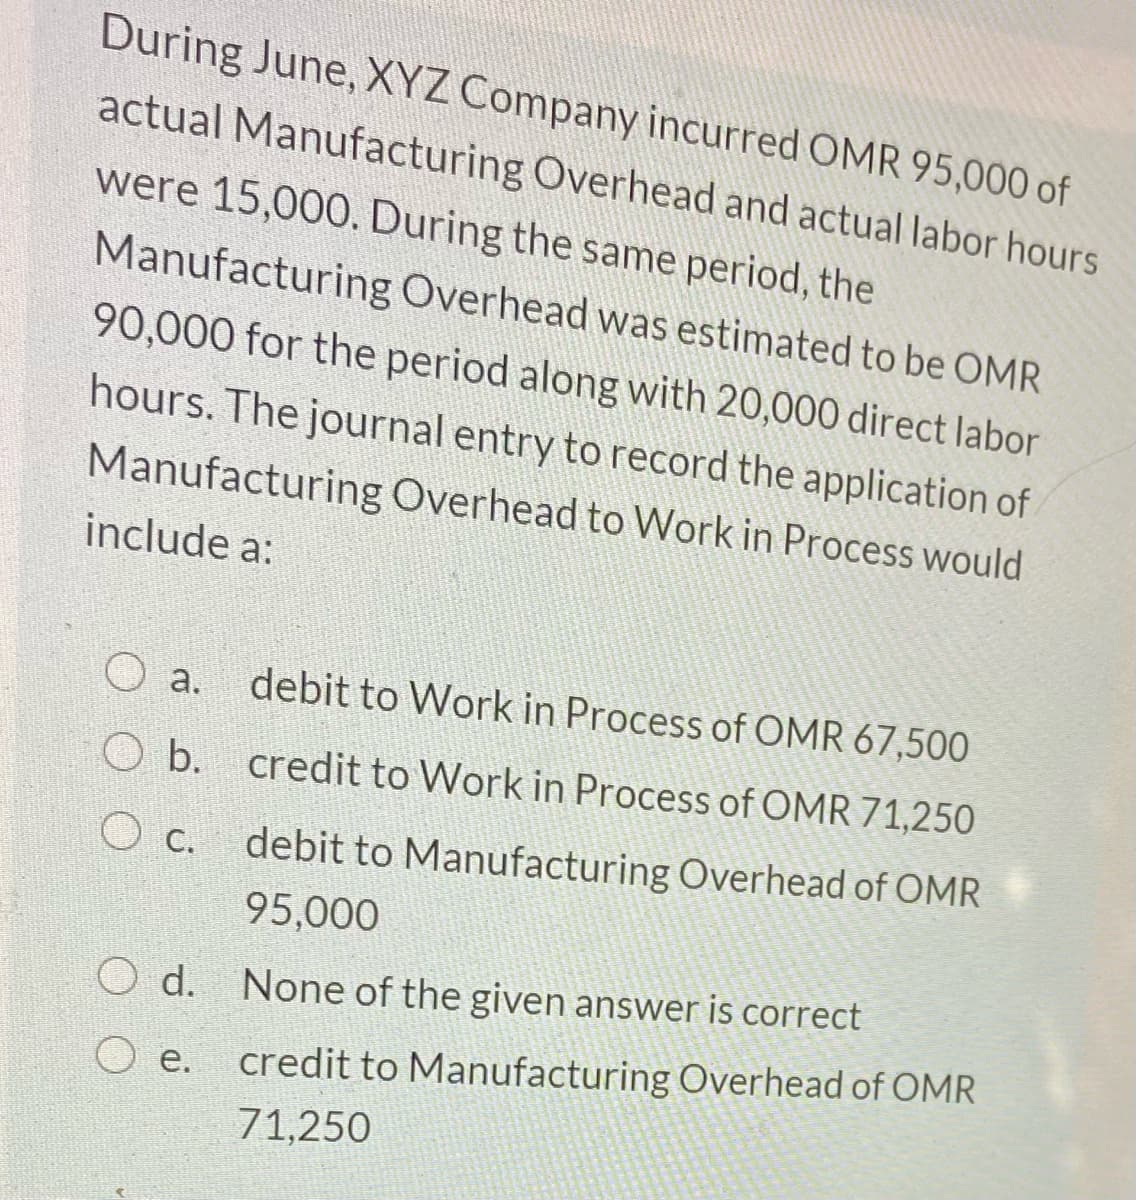 During June, XYZ Company incurred OMR 95,000 of
actual Manufacturing Overhead and actual labor hours
were 15,000. During the same period, the
Manufacturing Overhead was estimated to be OMR
90,000 for the period along with 20,000 direct labor
hours. The journal entry to record the application of
Manufacturing Overhead to Work in Process would
include a:
a.
debit to Work in Process of OMR 67,500
O b.
credit to Work in Process of OMR 71,250
debit to Manufacturing Overhead of OMR
O c.
95,000
d.
None of the given answer is correct
е.
credit to Manufacturing Overhead of OMR
71,250
